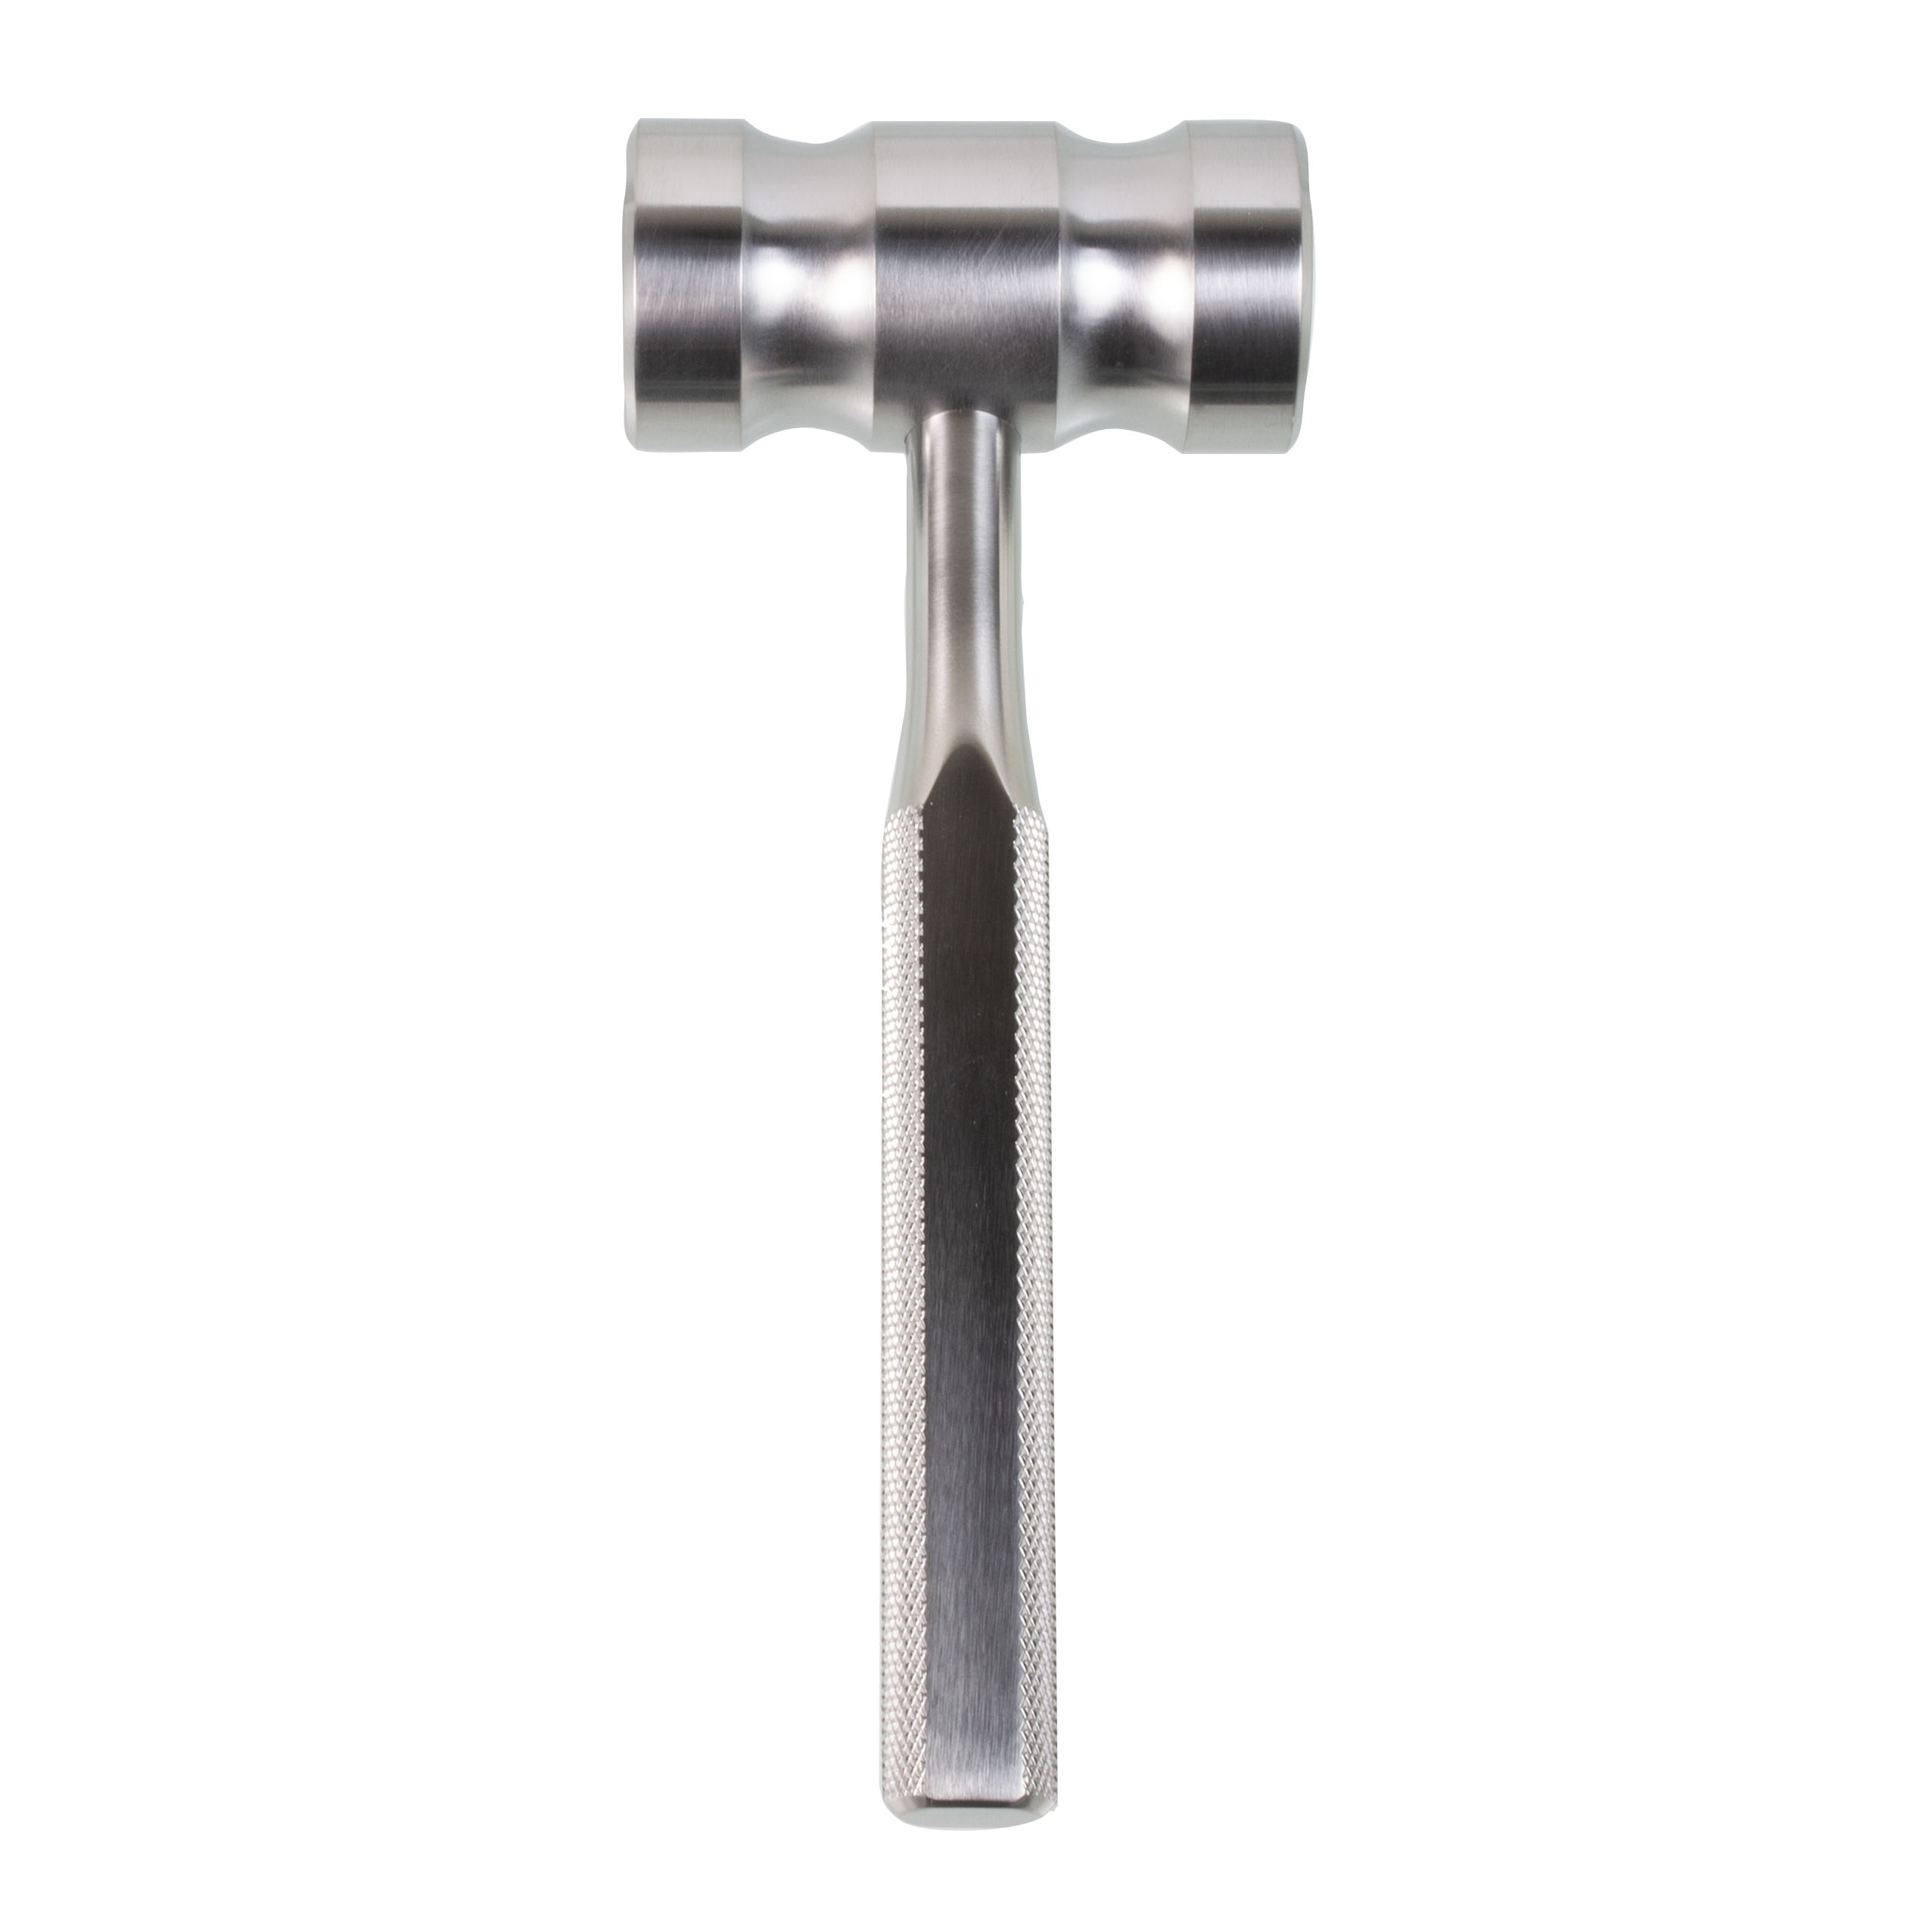 7 Orthopedic Mallet - 2lb solid head - BOSS Surgical Instruments